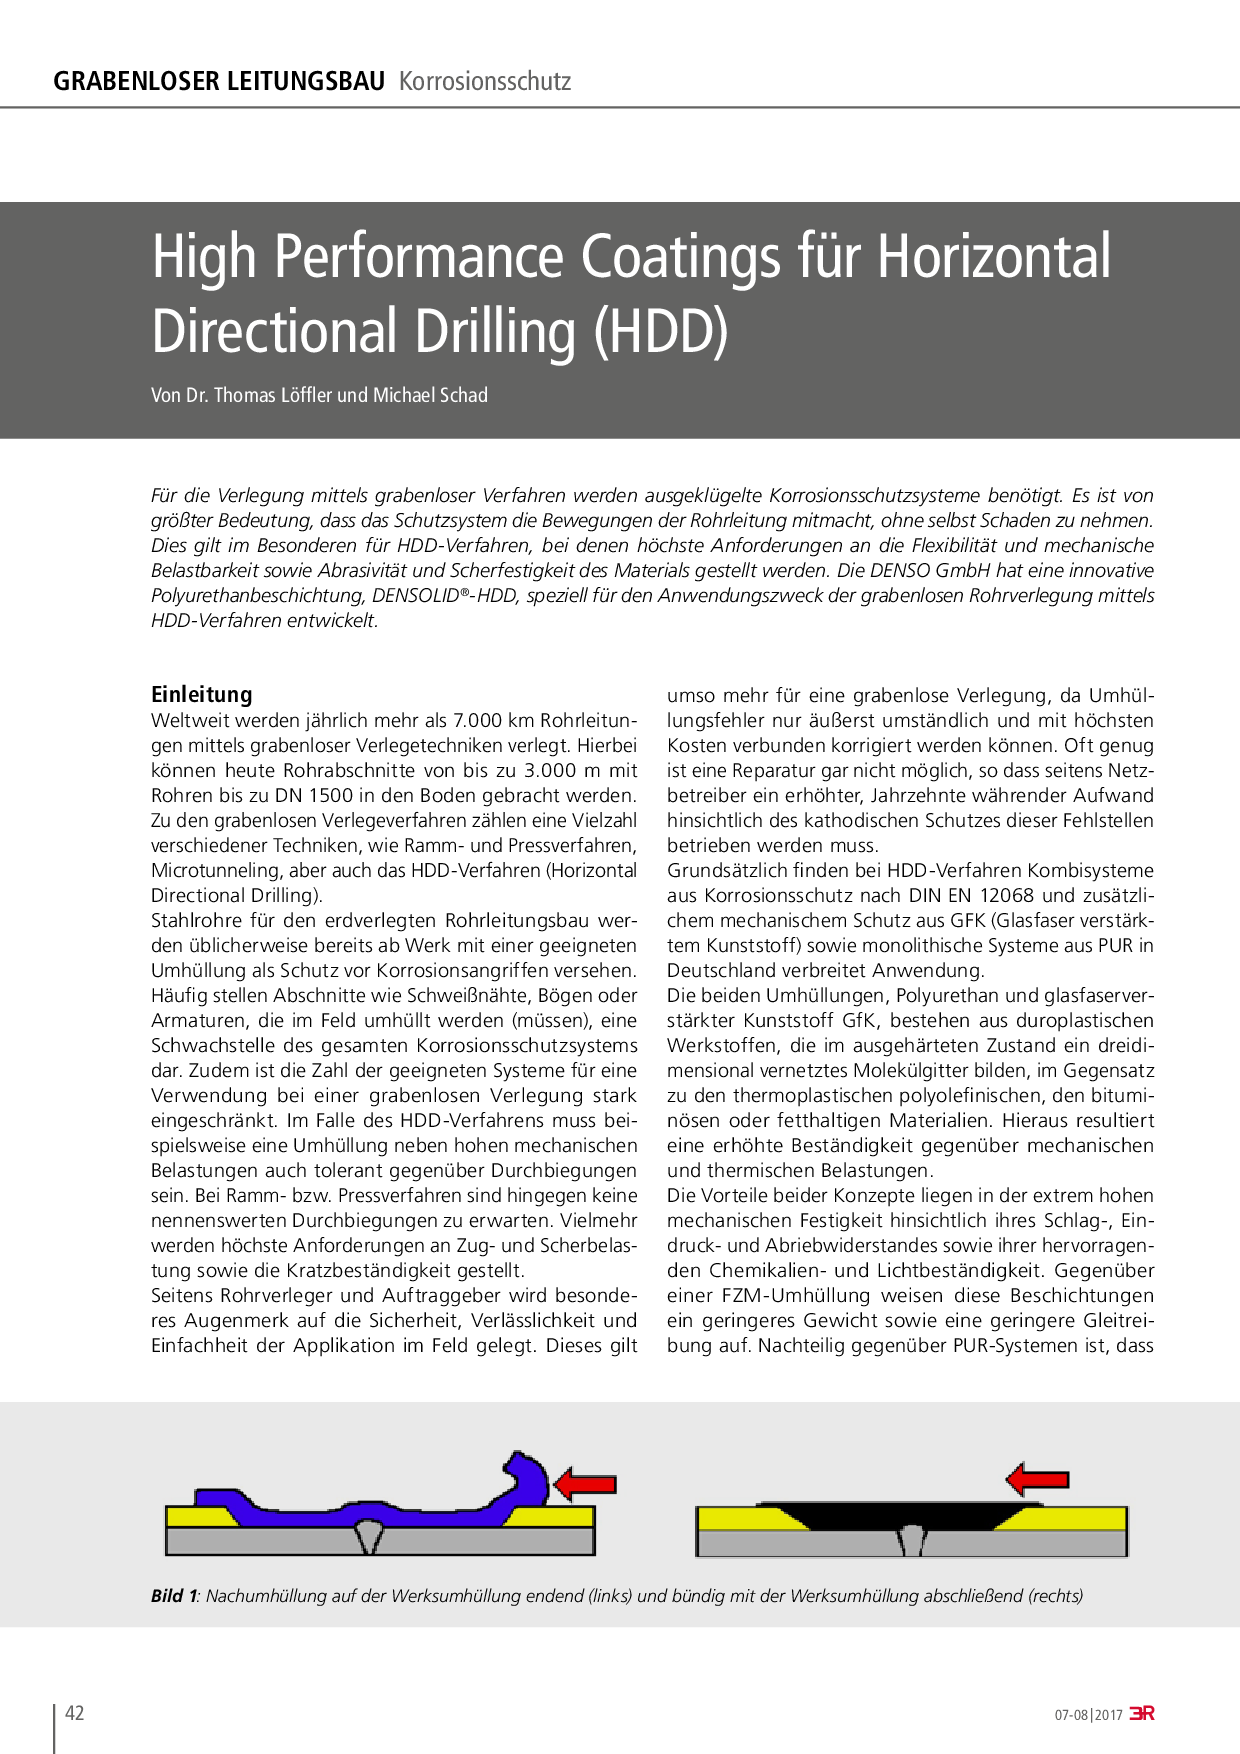 High Performance Coatings für Horizontal Directional Drilling (HDD)